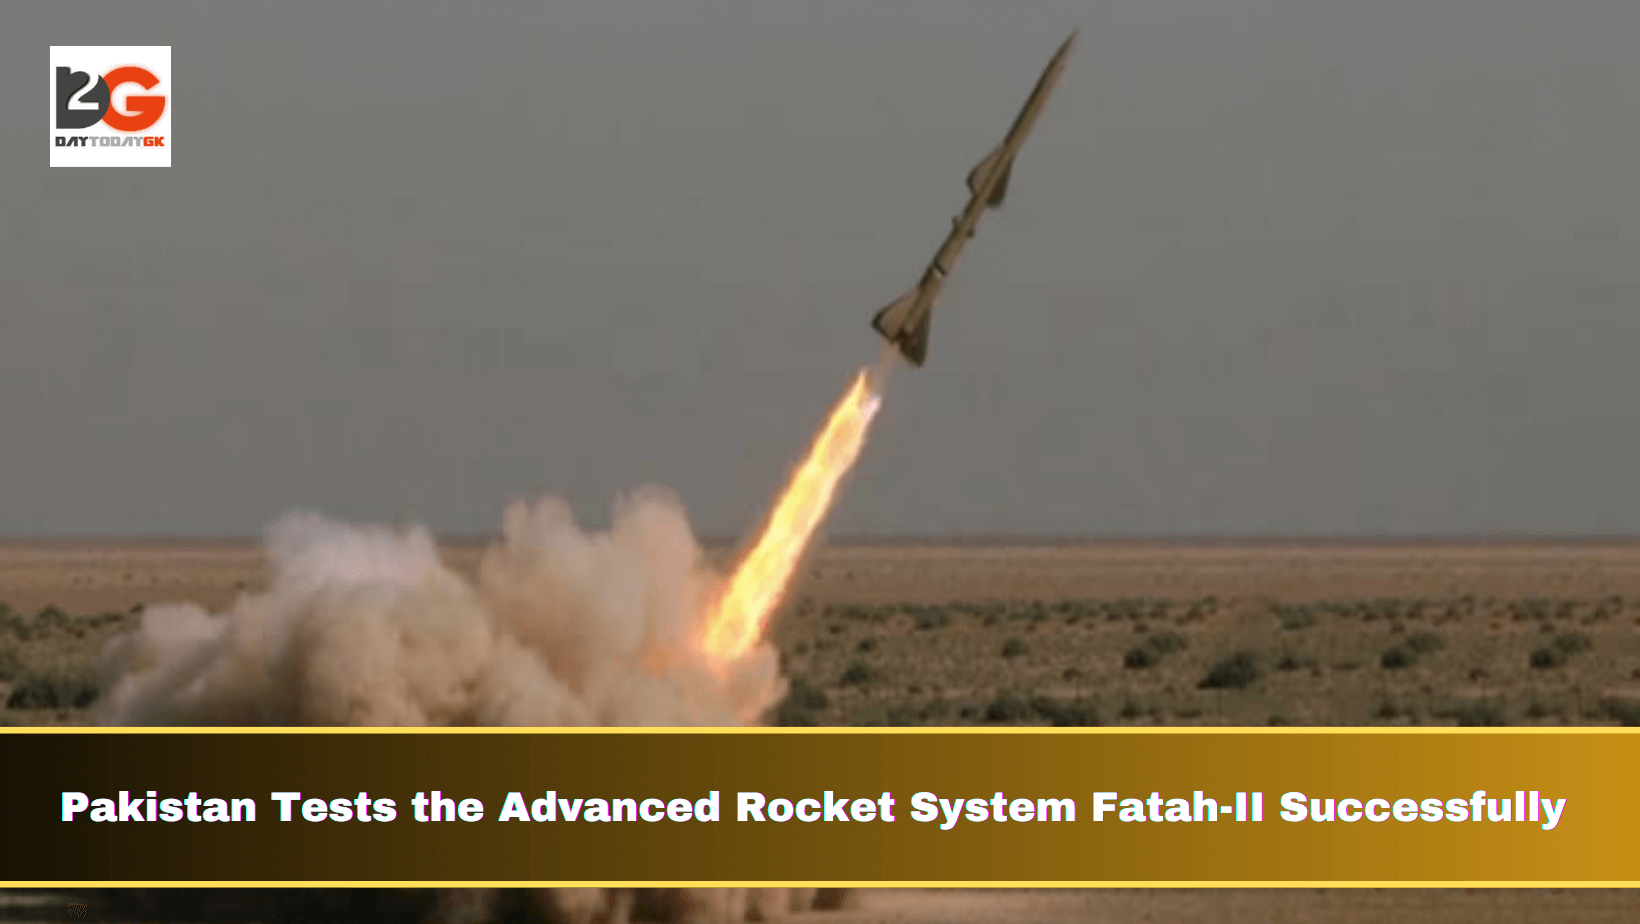 Pakistan Tests the Advanced Rocket System Fatah-II Successfully